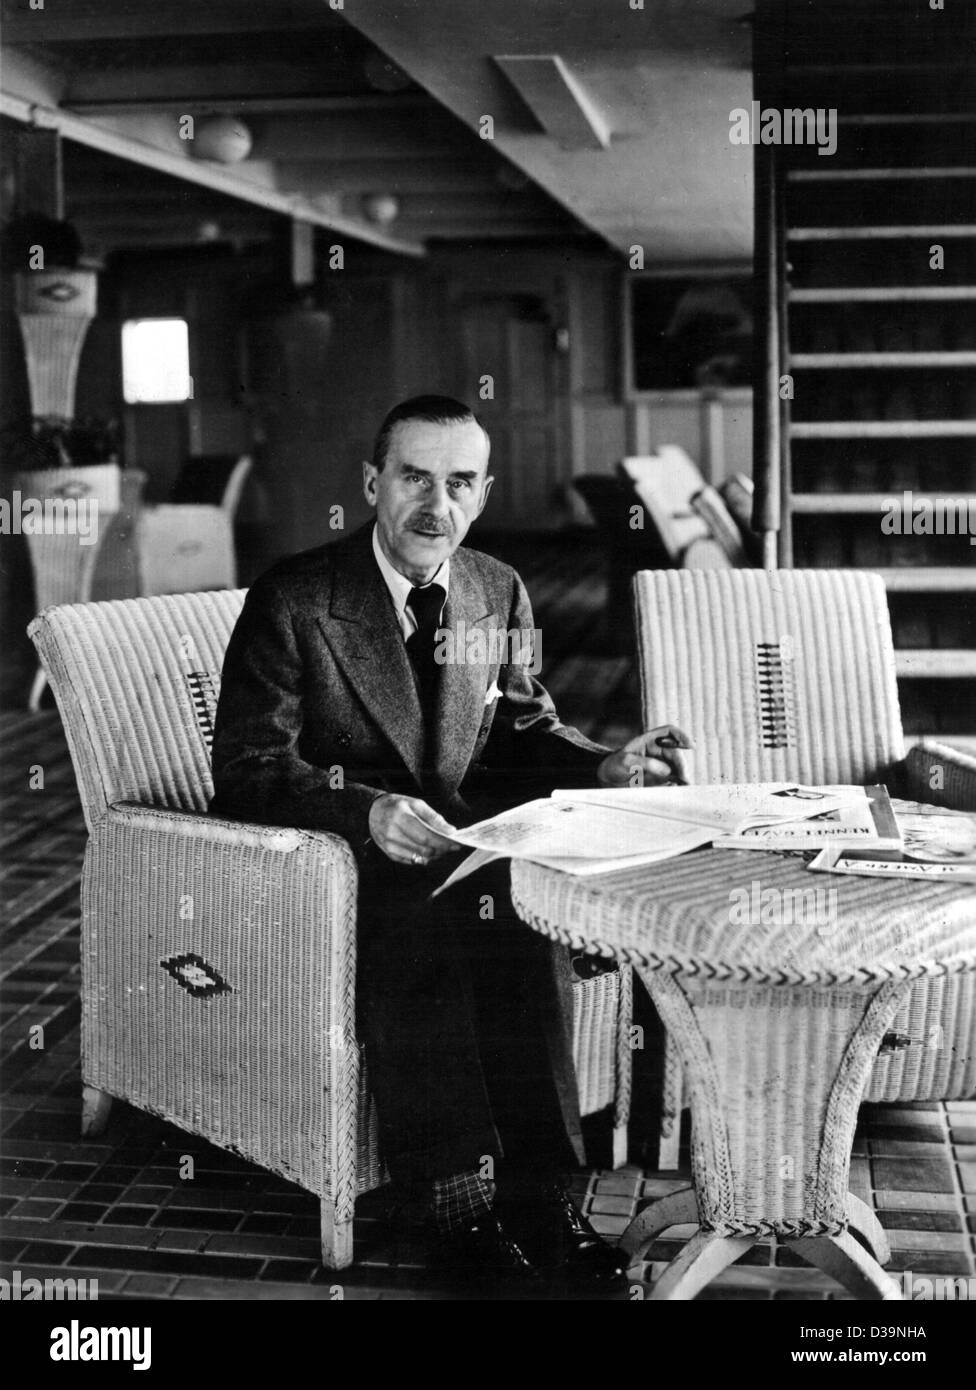 (dpa) - German author and Noble Prize winner Thomas Mann, photographed in the USA in 1947. As a critic of the Nazi regime he emigrated to Switzerland in 1933 and later to the USA where he adopted the American citizienship in 1944. His most important works are 'Buddenbrooks' (1901), 'Death in Venice' Stock Photo